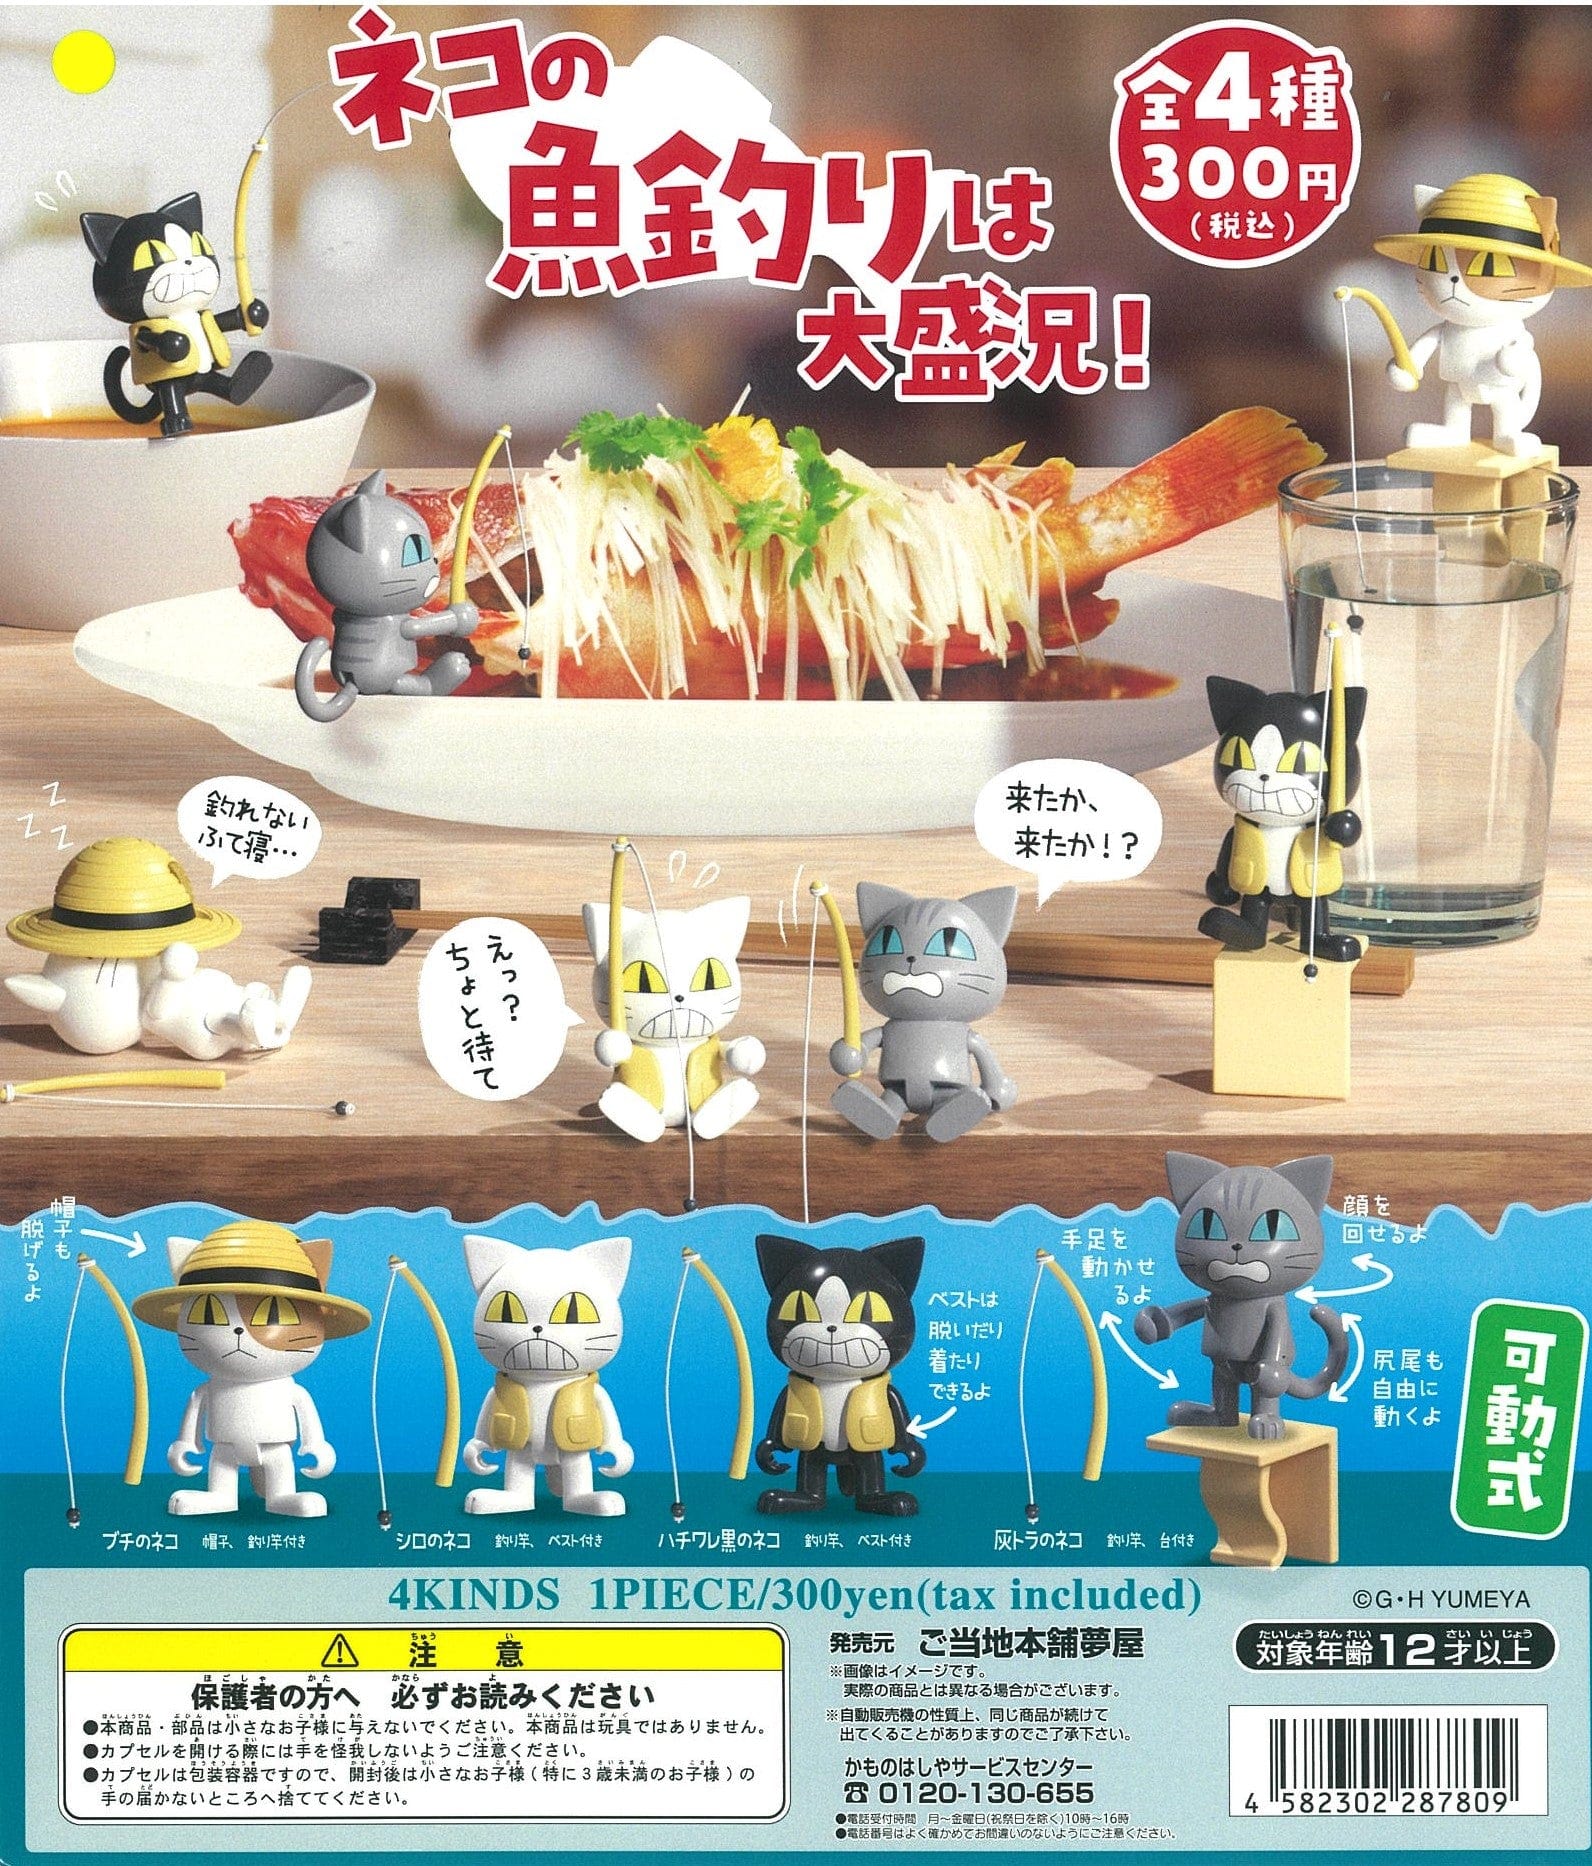 GH YUMEYA CP1849 Cat's Fishing is a Great Success!